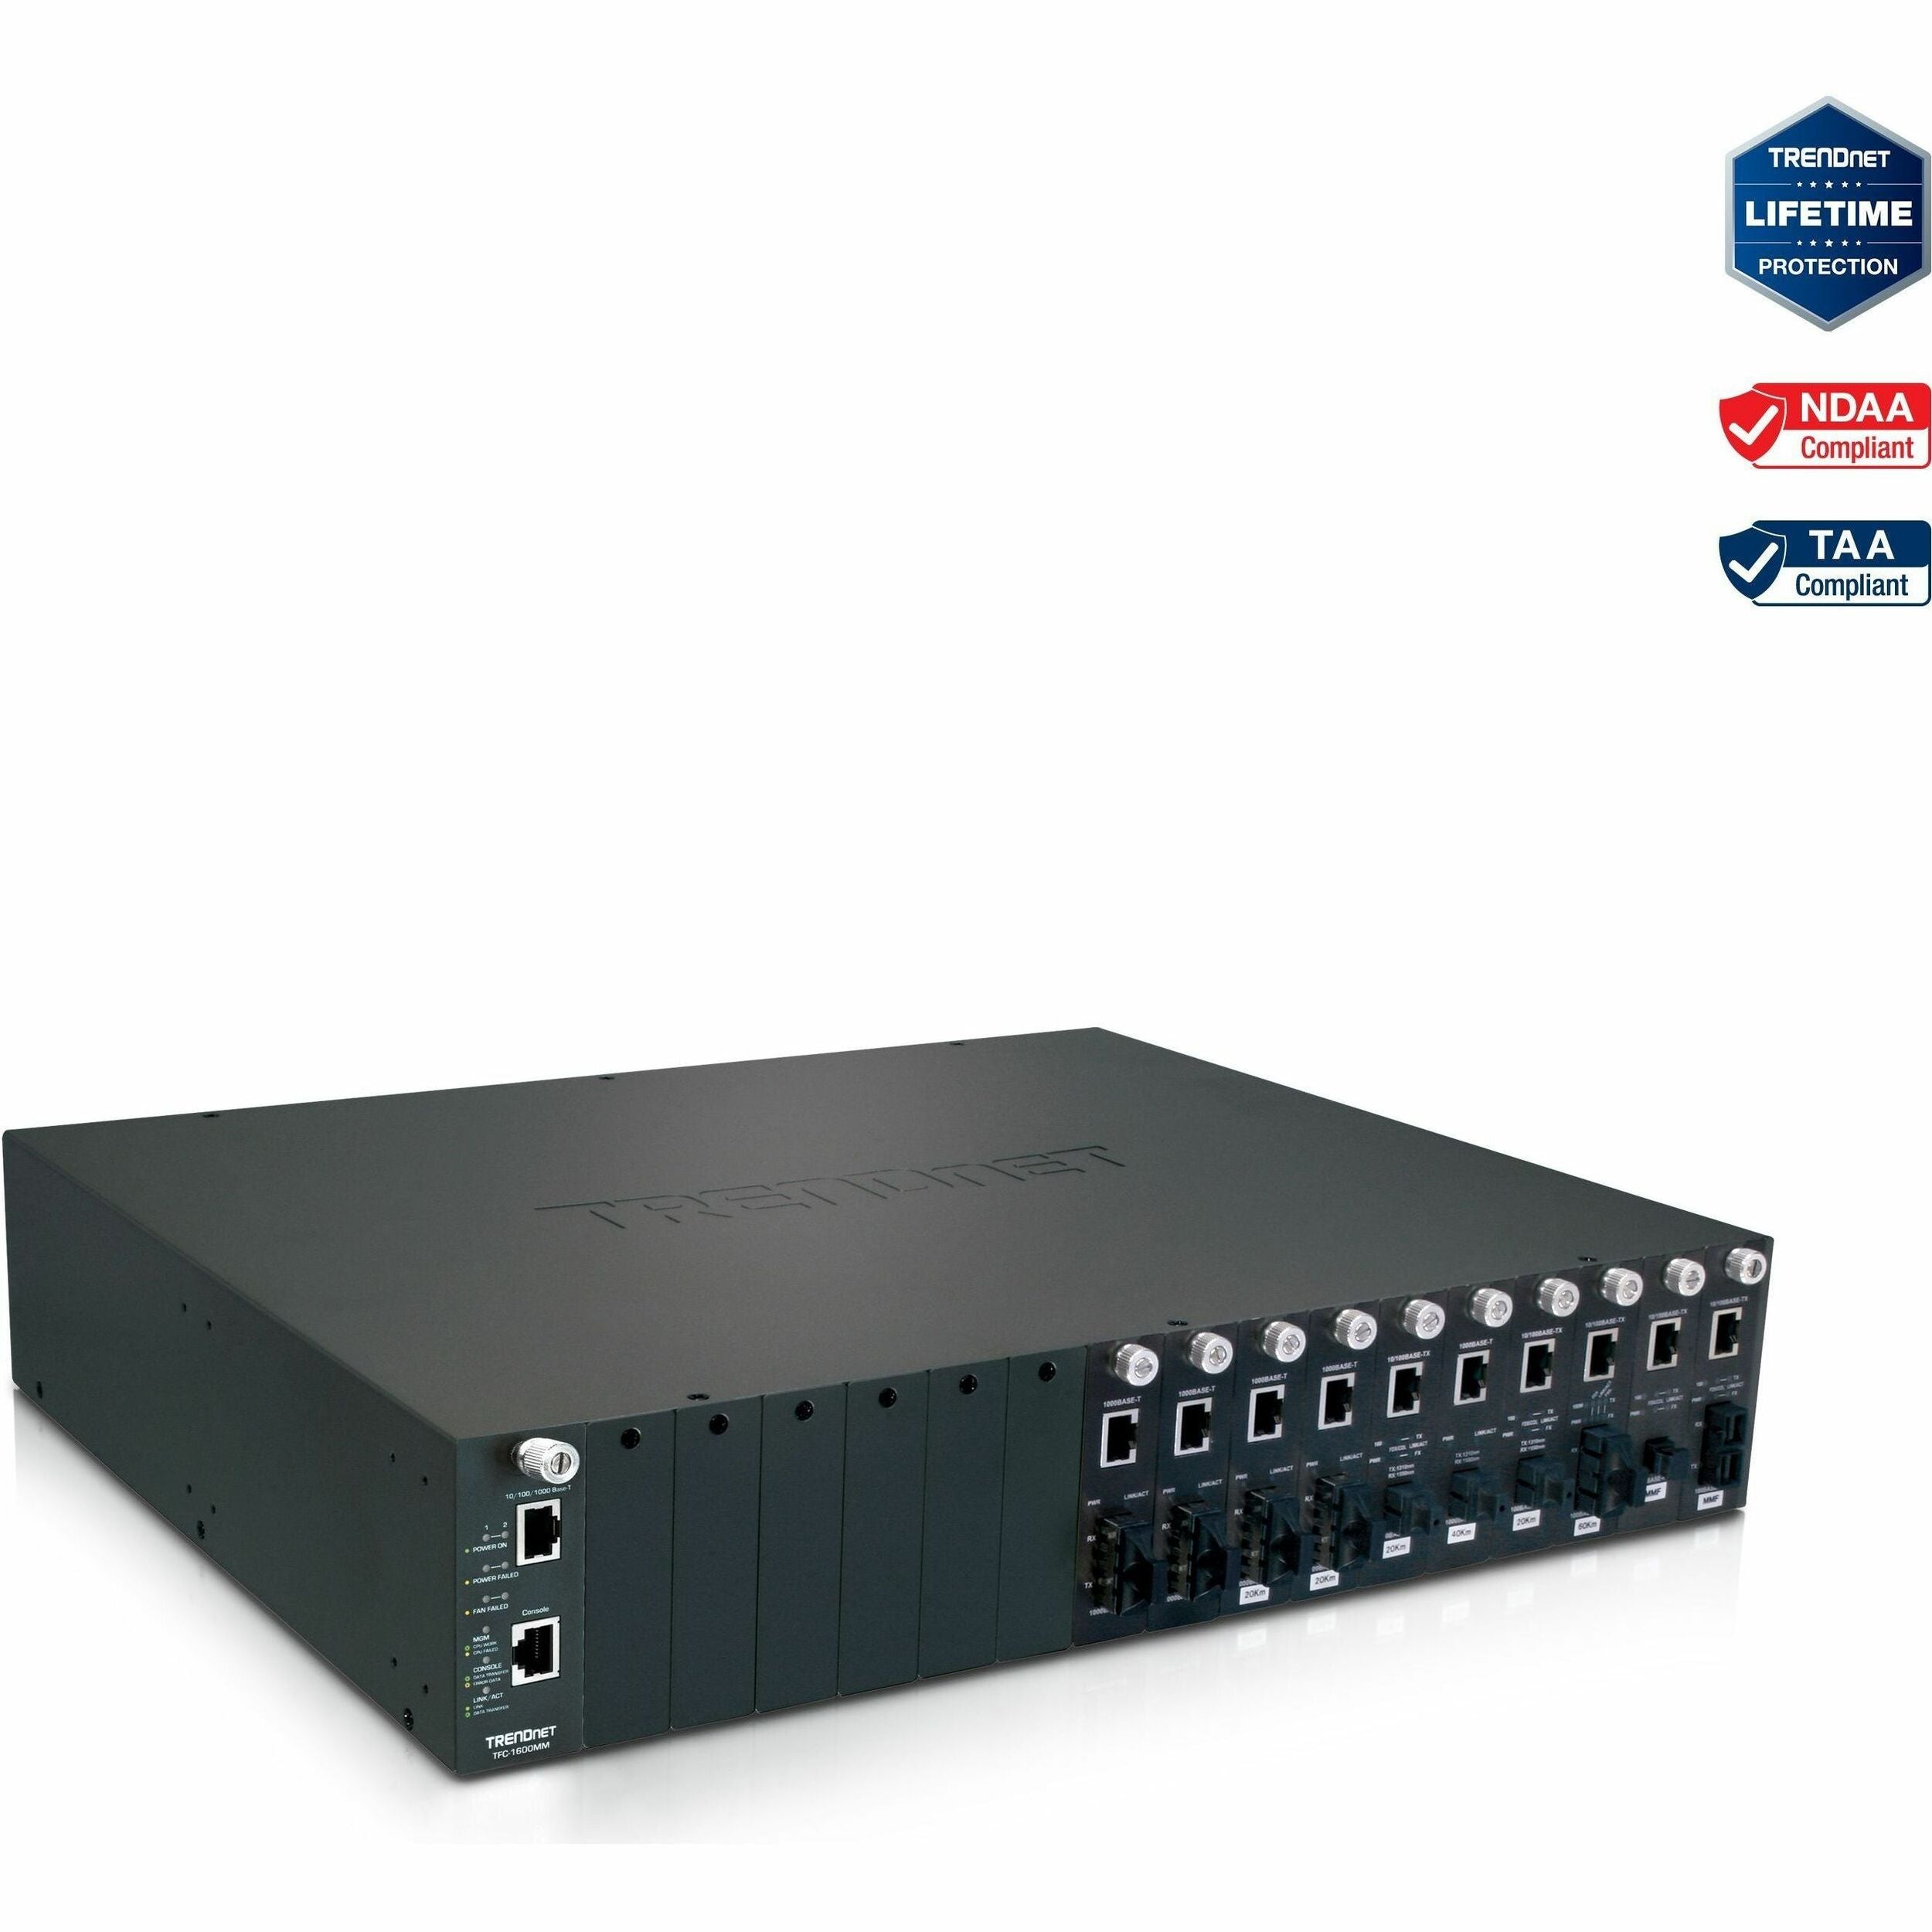 TRENDnet 16-Bay Fiber Converter Chassis System; Hot Swappable; Housing for up to 16 TFC Series Media Converters; Fast Ethernet RJ45; RS-232; SNMP Management Module; Lifetime Protection; TFC-1600 - TFC-1600